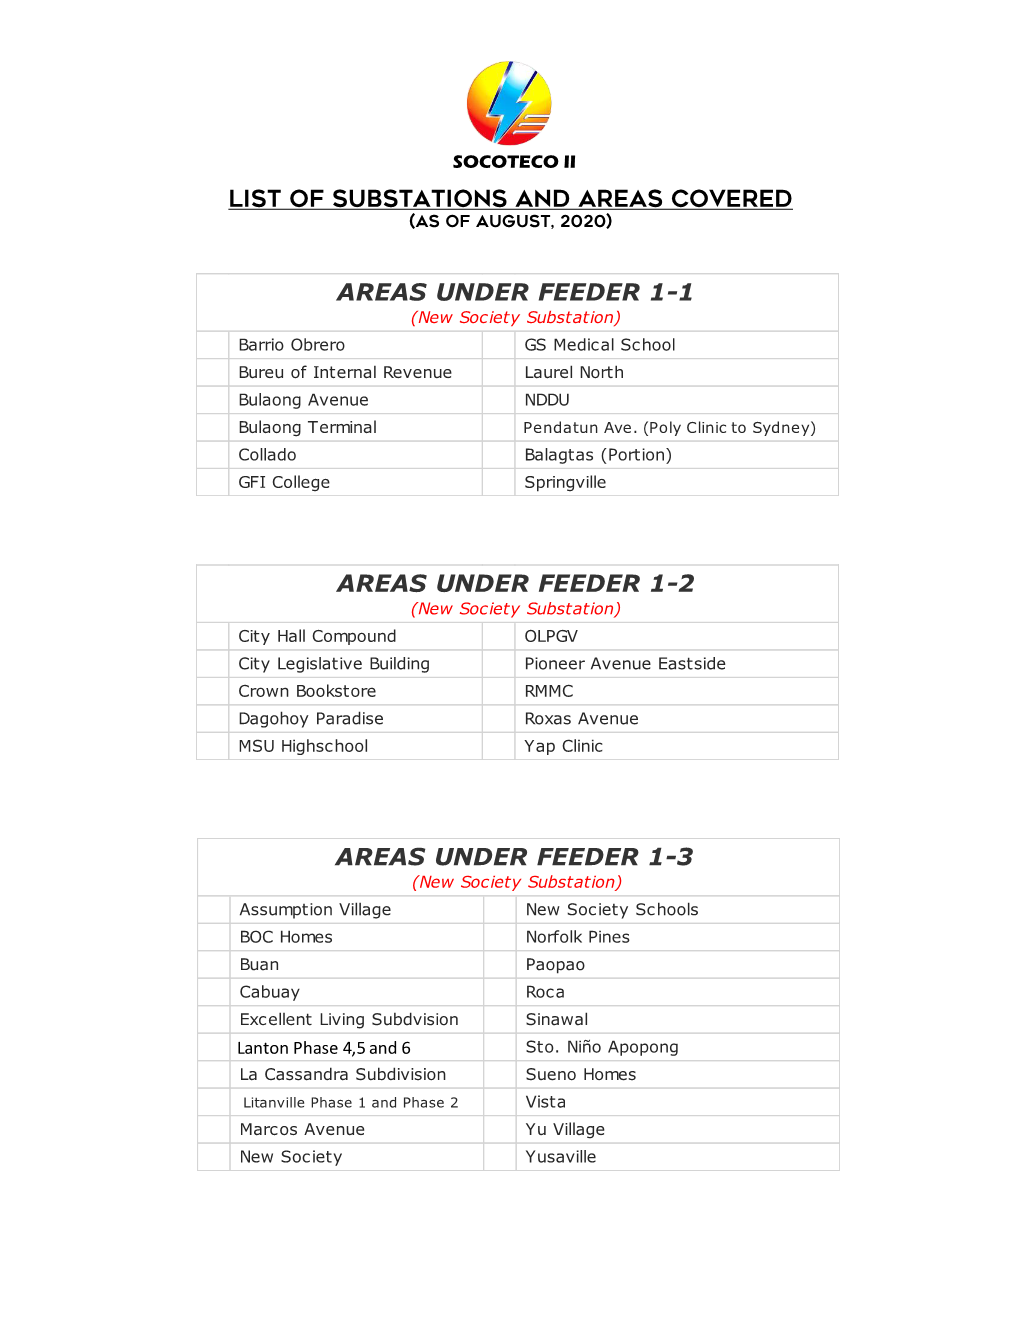 Areas Under Feeder 1-3 List of Substations and Areas